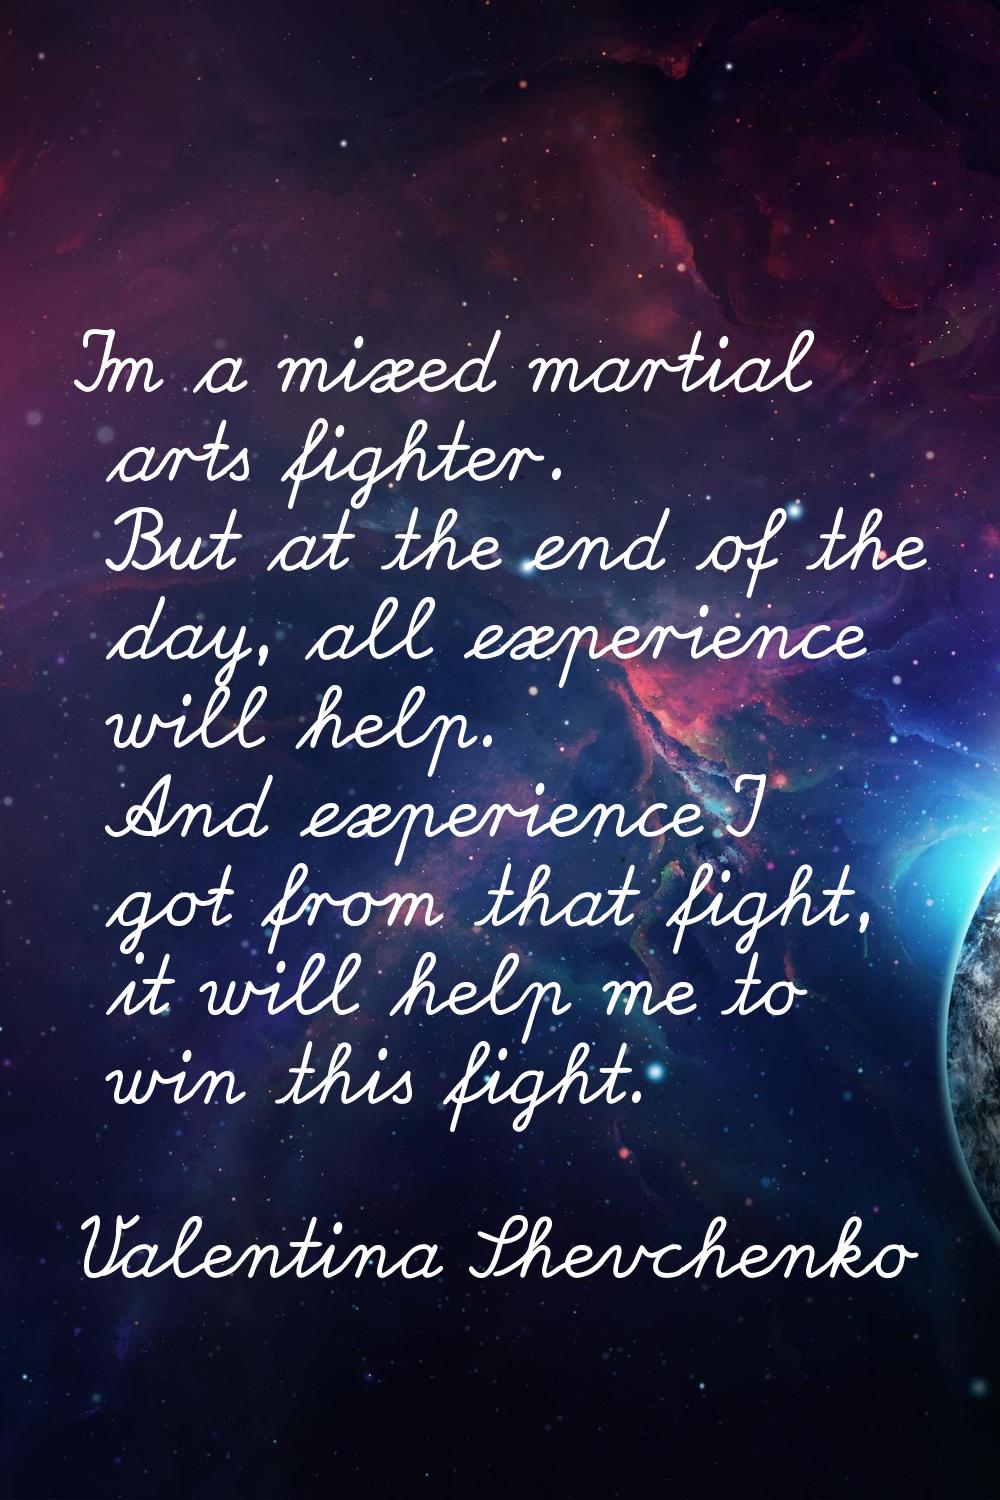 I'm a mixed martial arts fighter. But at the end of the day, all experience will help. And experien